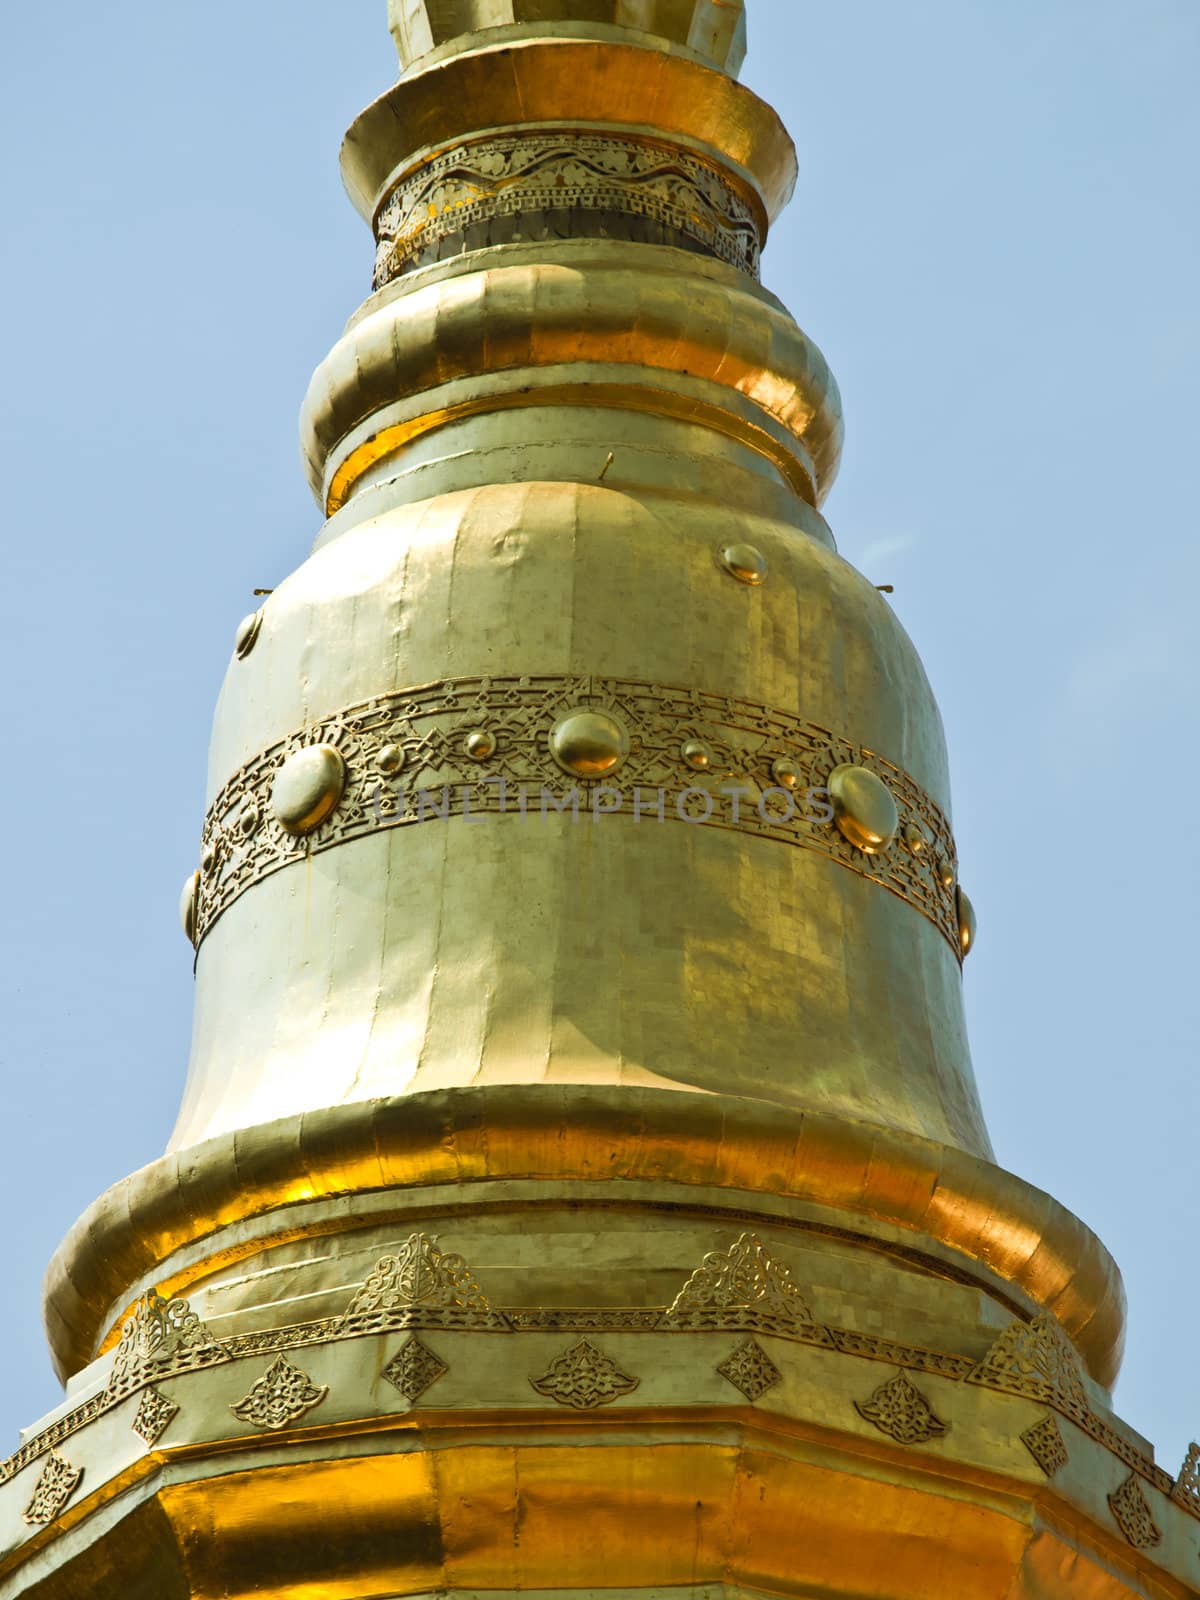 Closed up of golden pagoda, Wat Phrathat chomkitti temple in Chi by gururugu